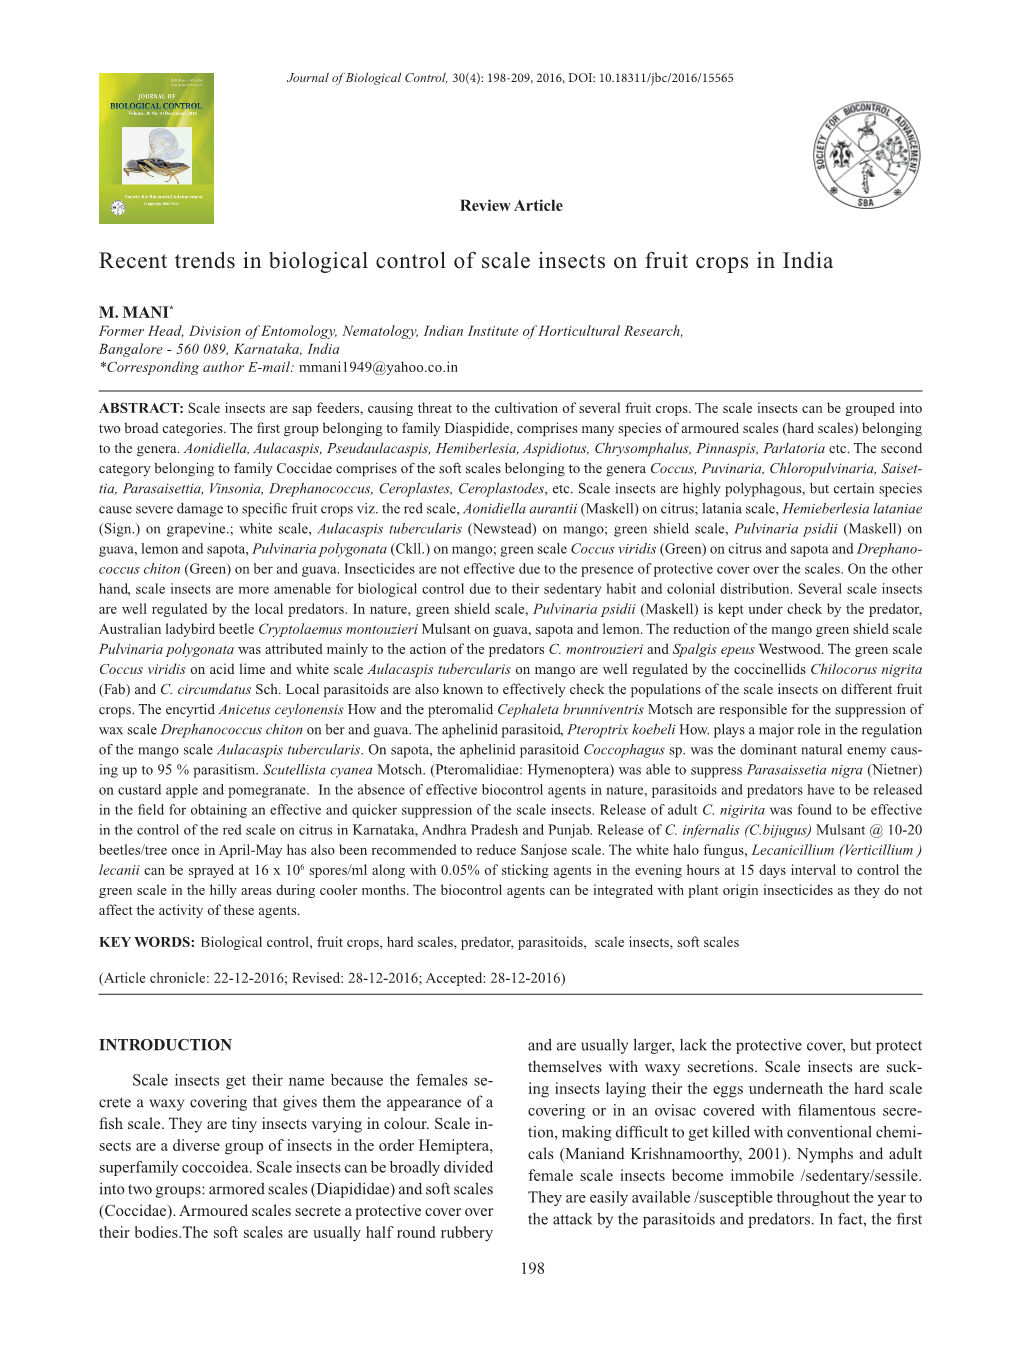 Recent Trends in Biological Control of Scale Insects on Fruit Crops in India